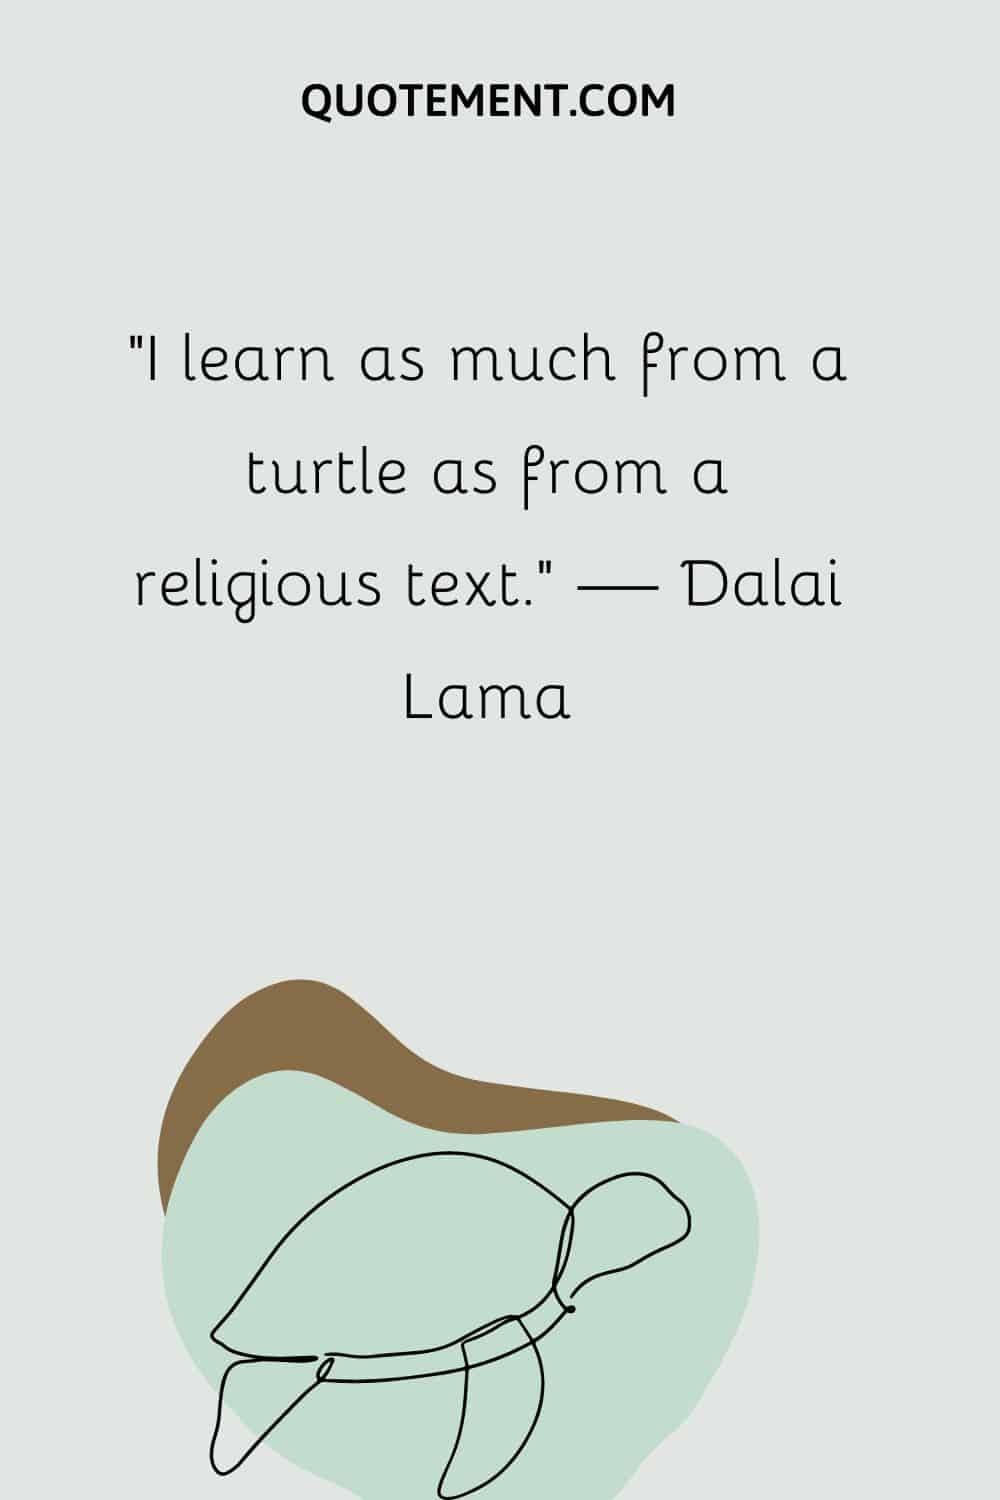 I learn as much from a turtle as from a religious text